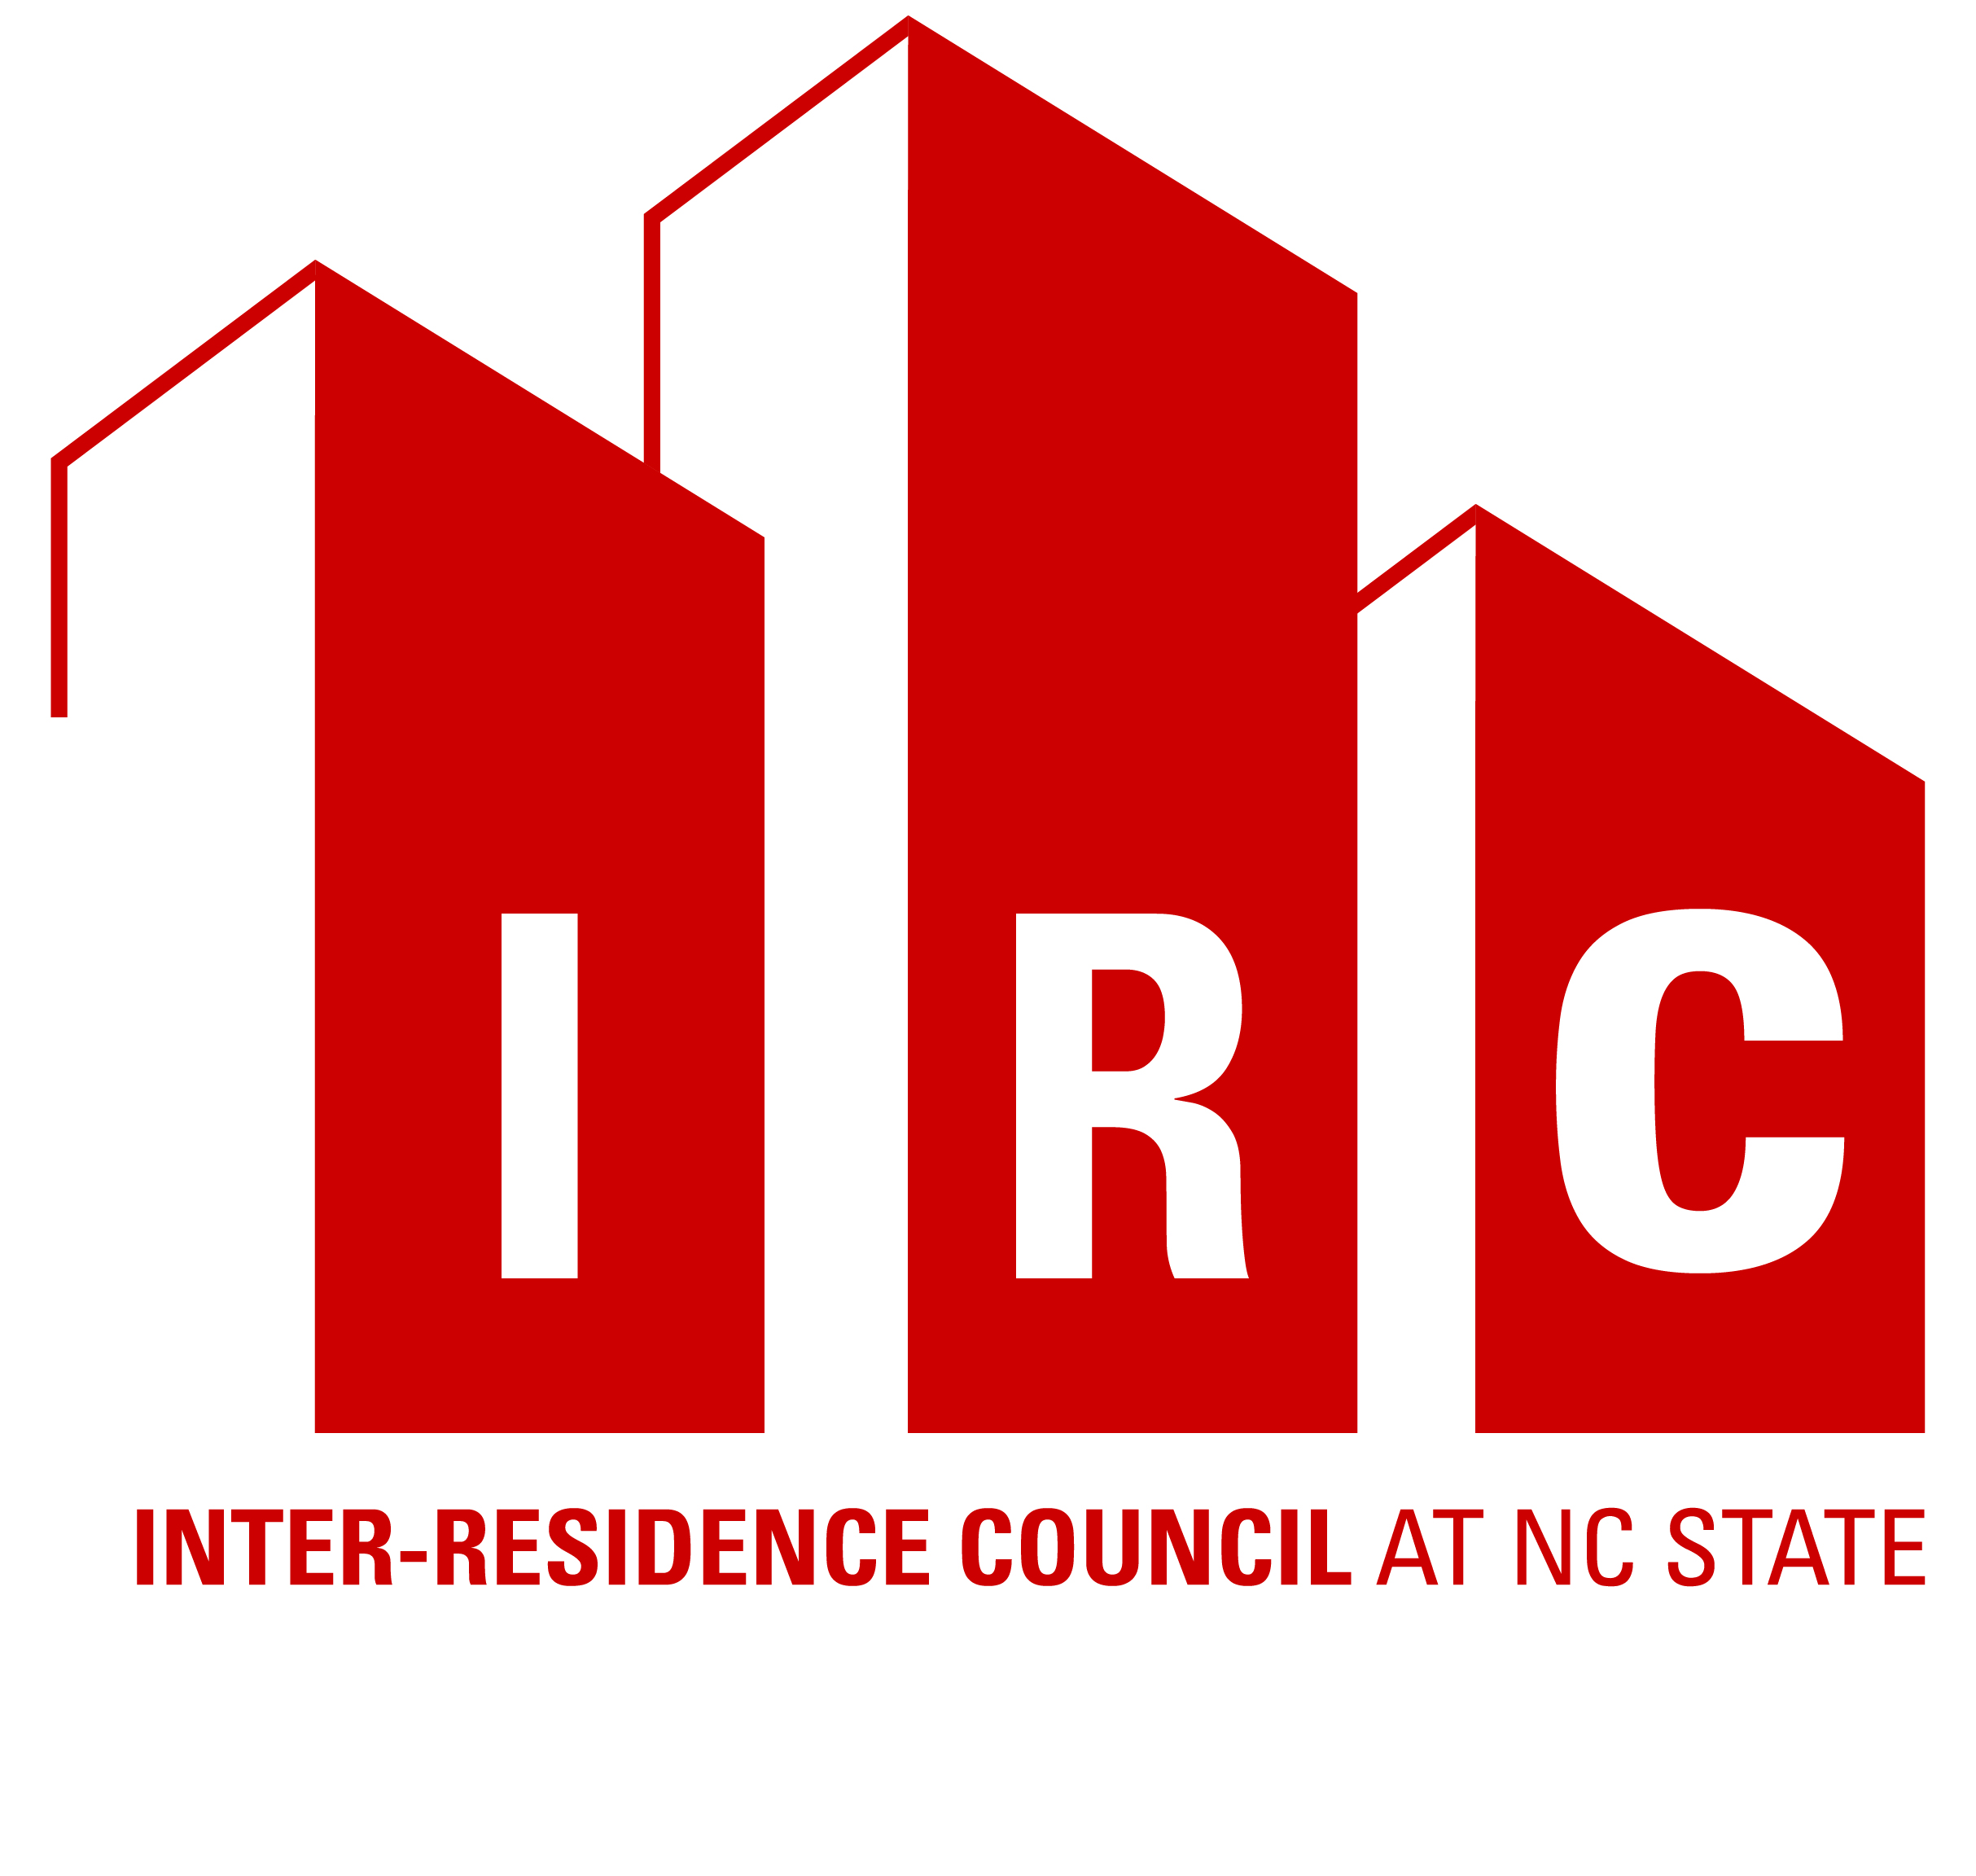 The IRC Logo in red.